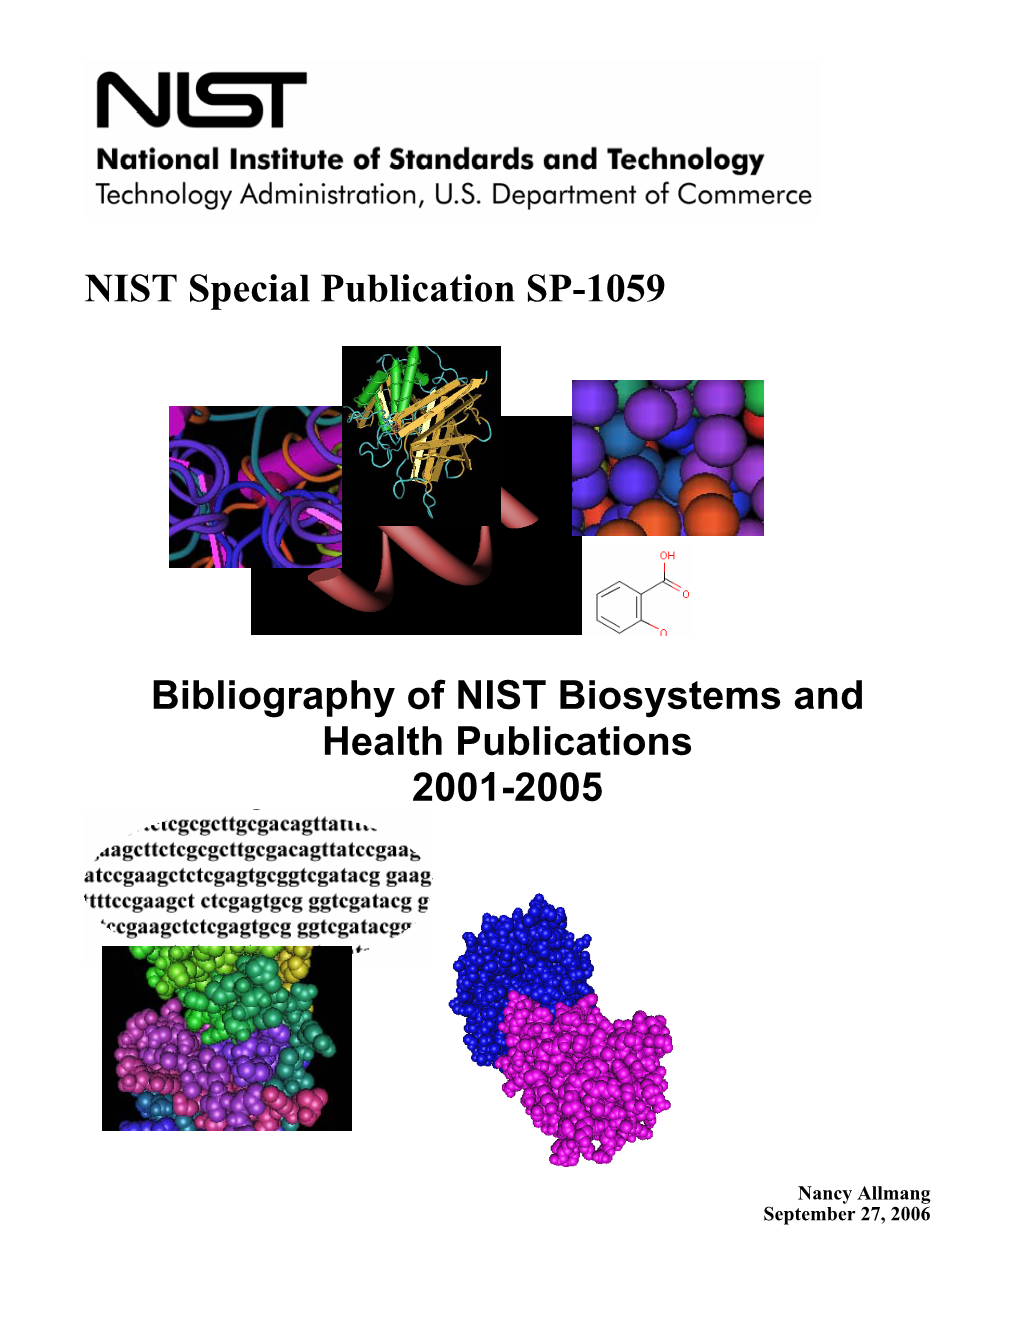 Bibliography of NIST Biosystems and Health Publications, 2001-2005